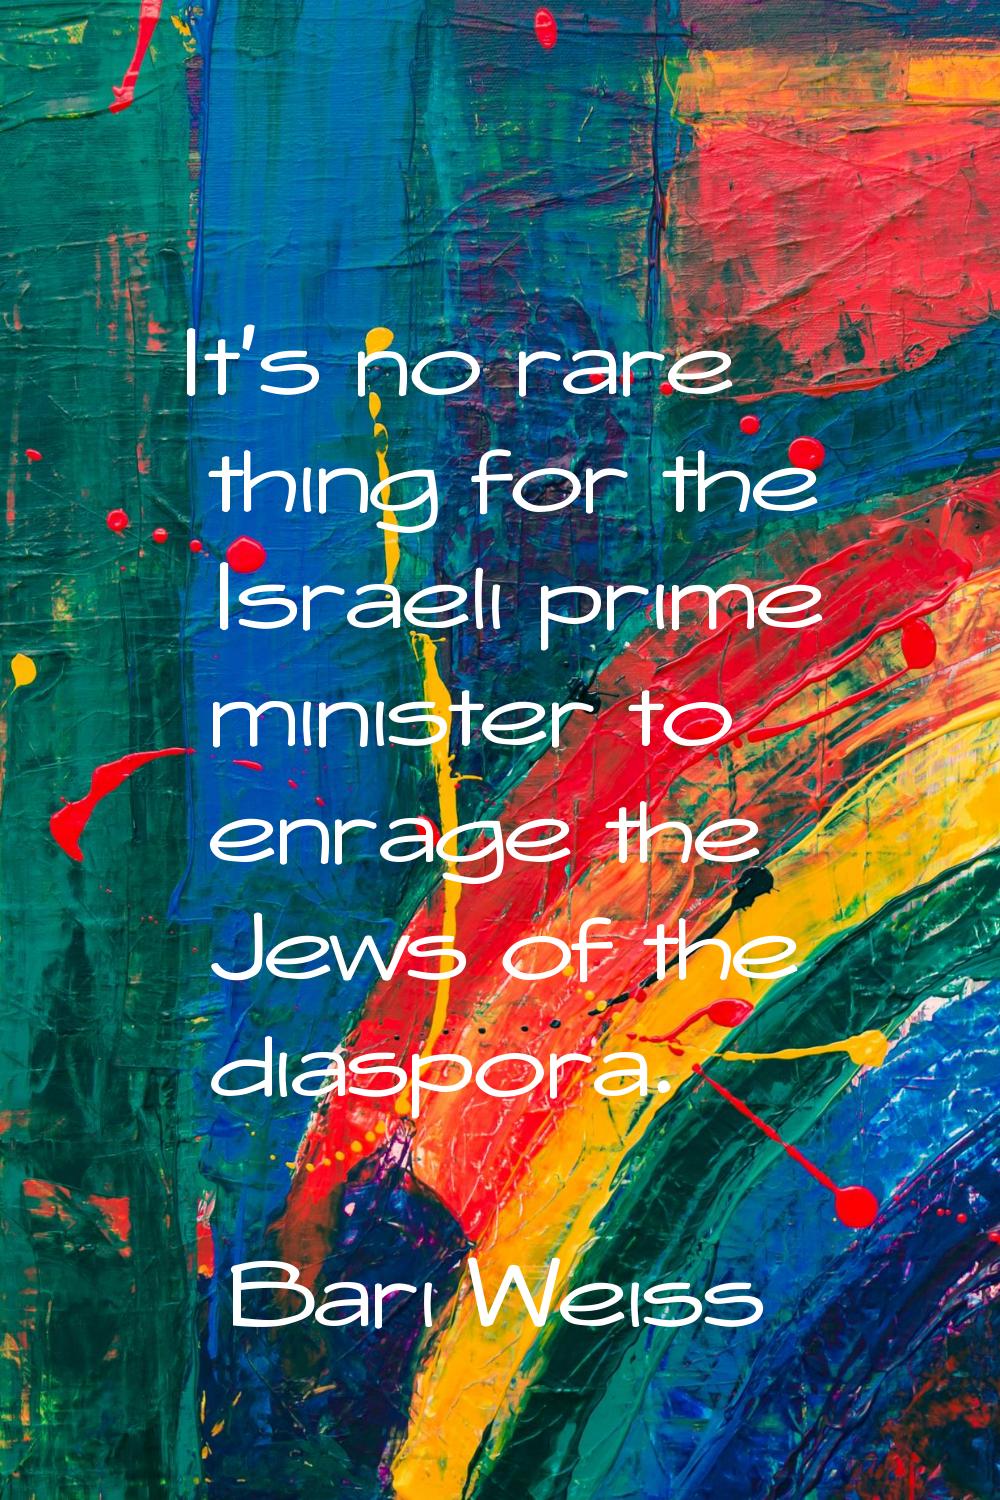 It's no rare thing for the Israeli prime minister to enrage the Jews of the diaspora.